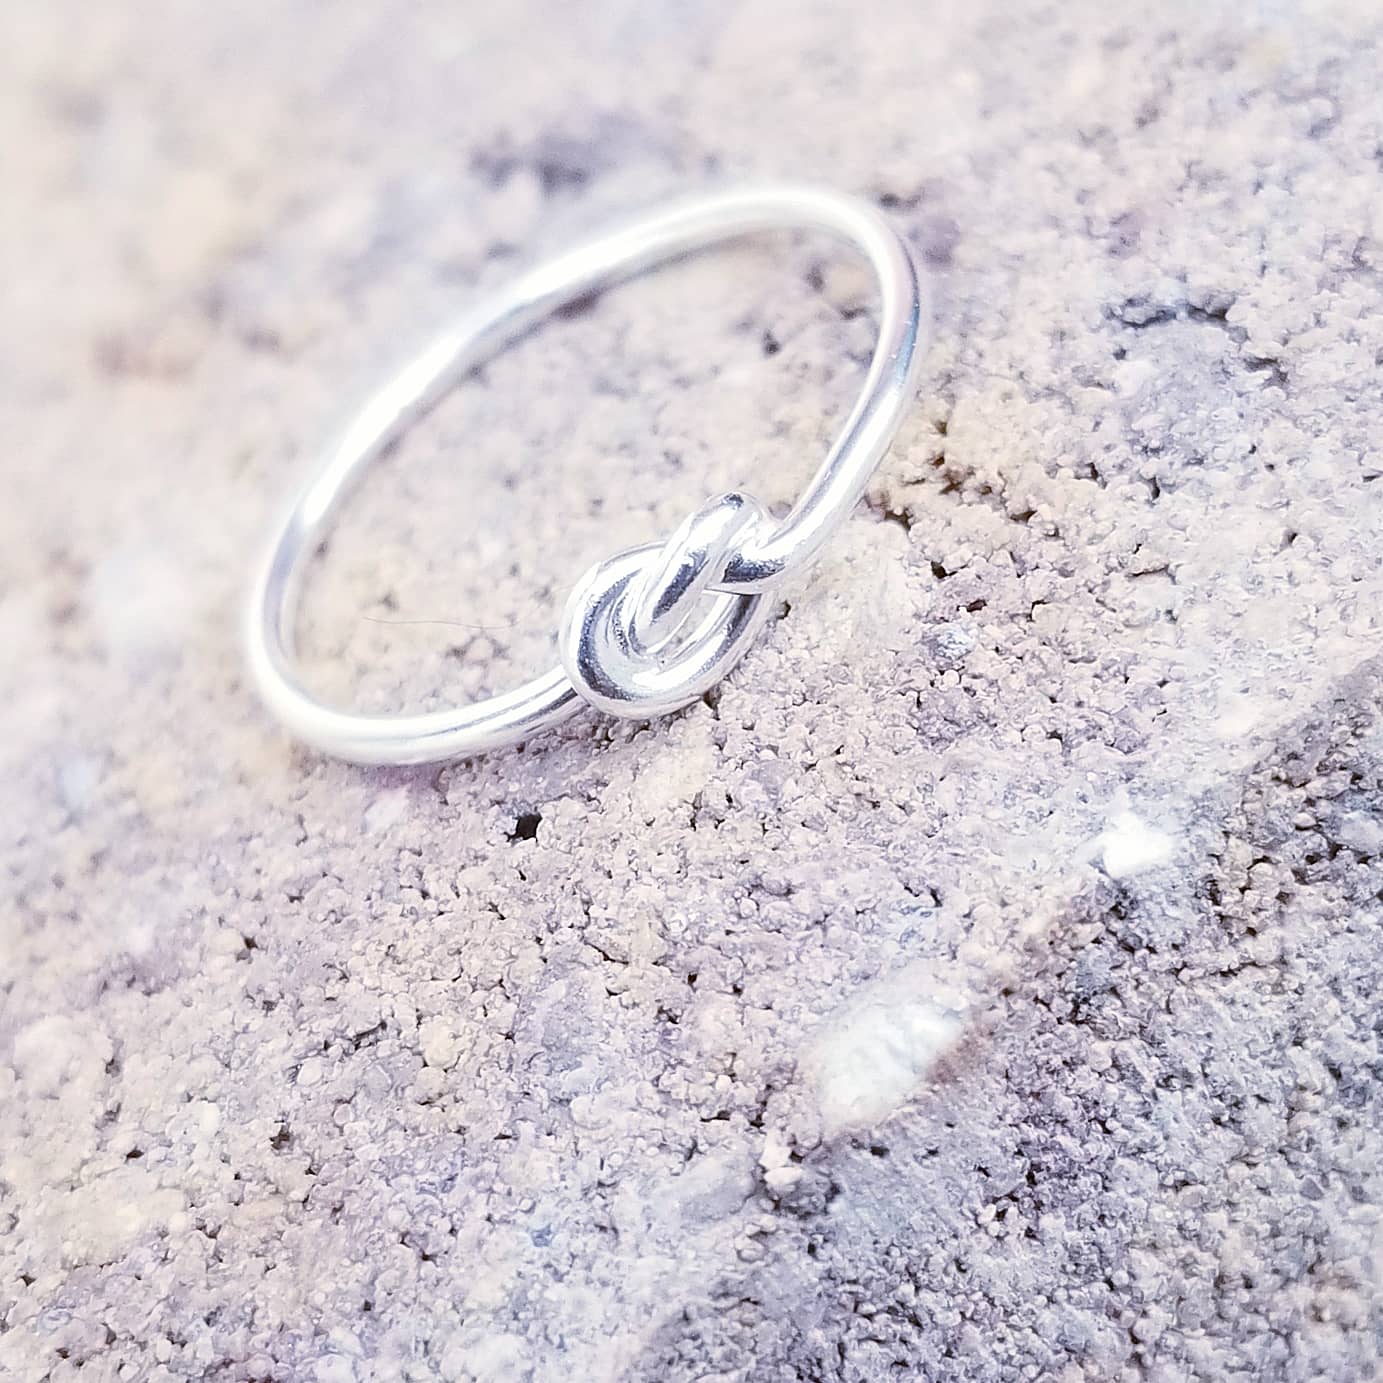 Sterling Silver Forever Knot Ring